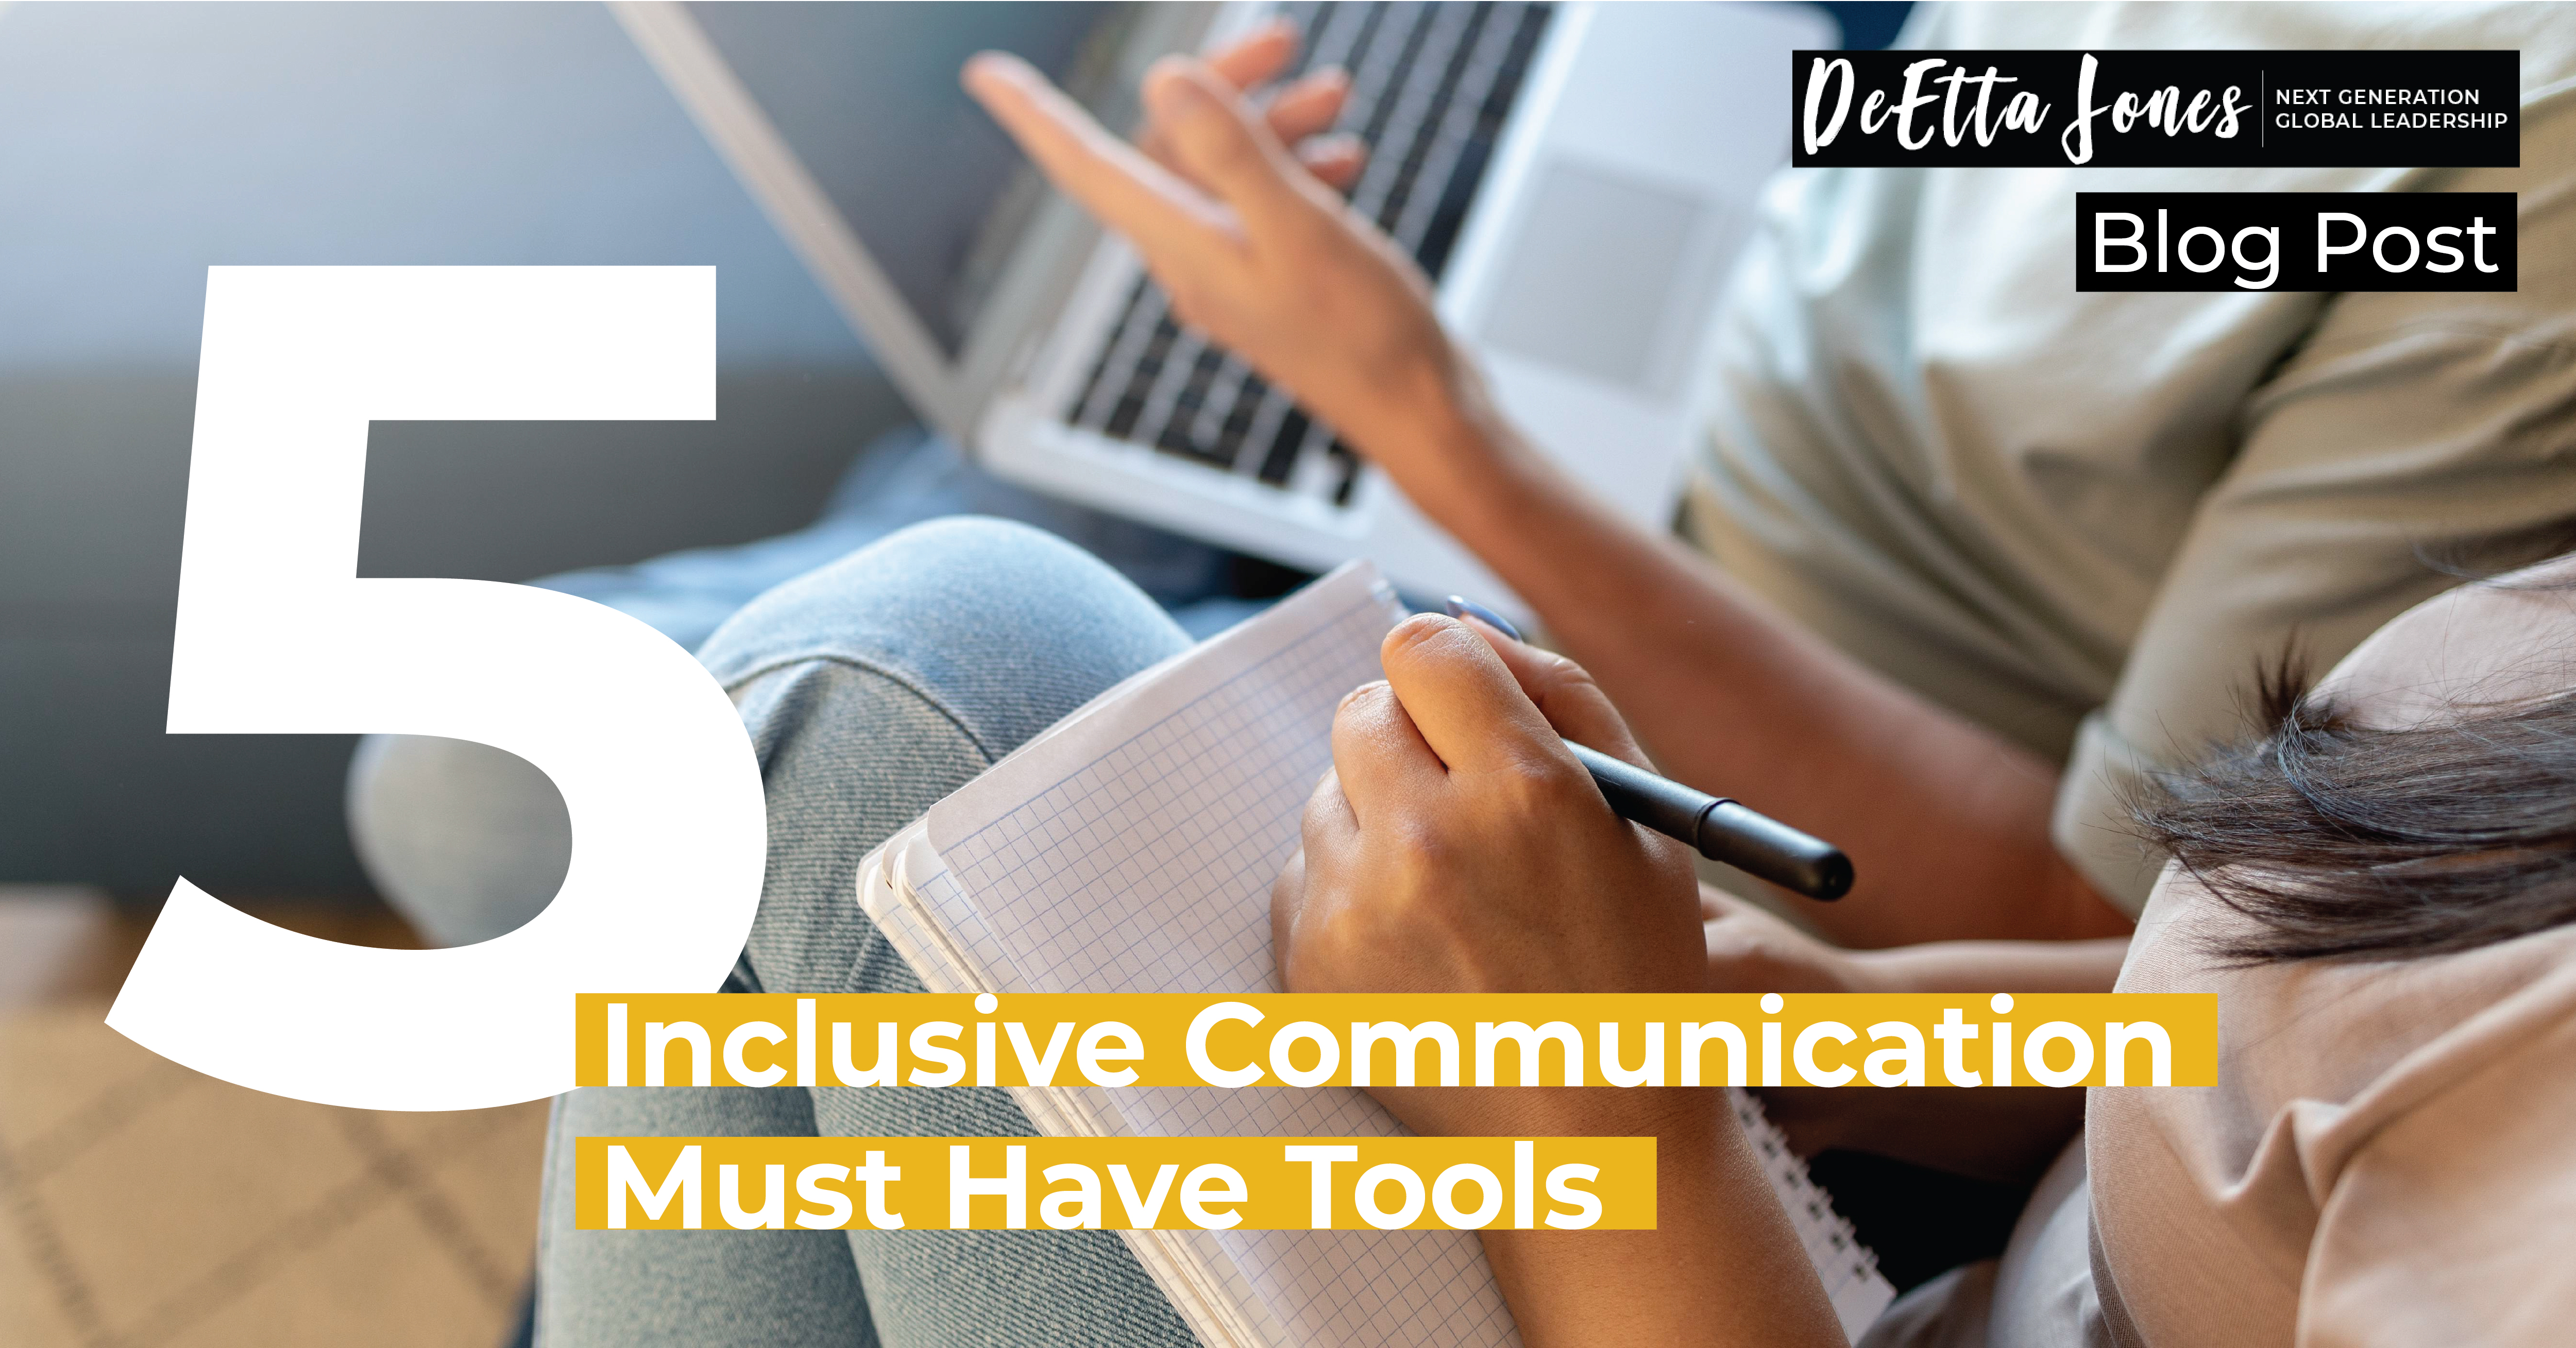 5 Inclusive Communication Must Have Tools